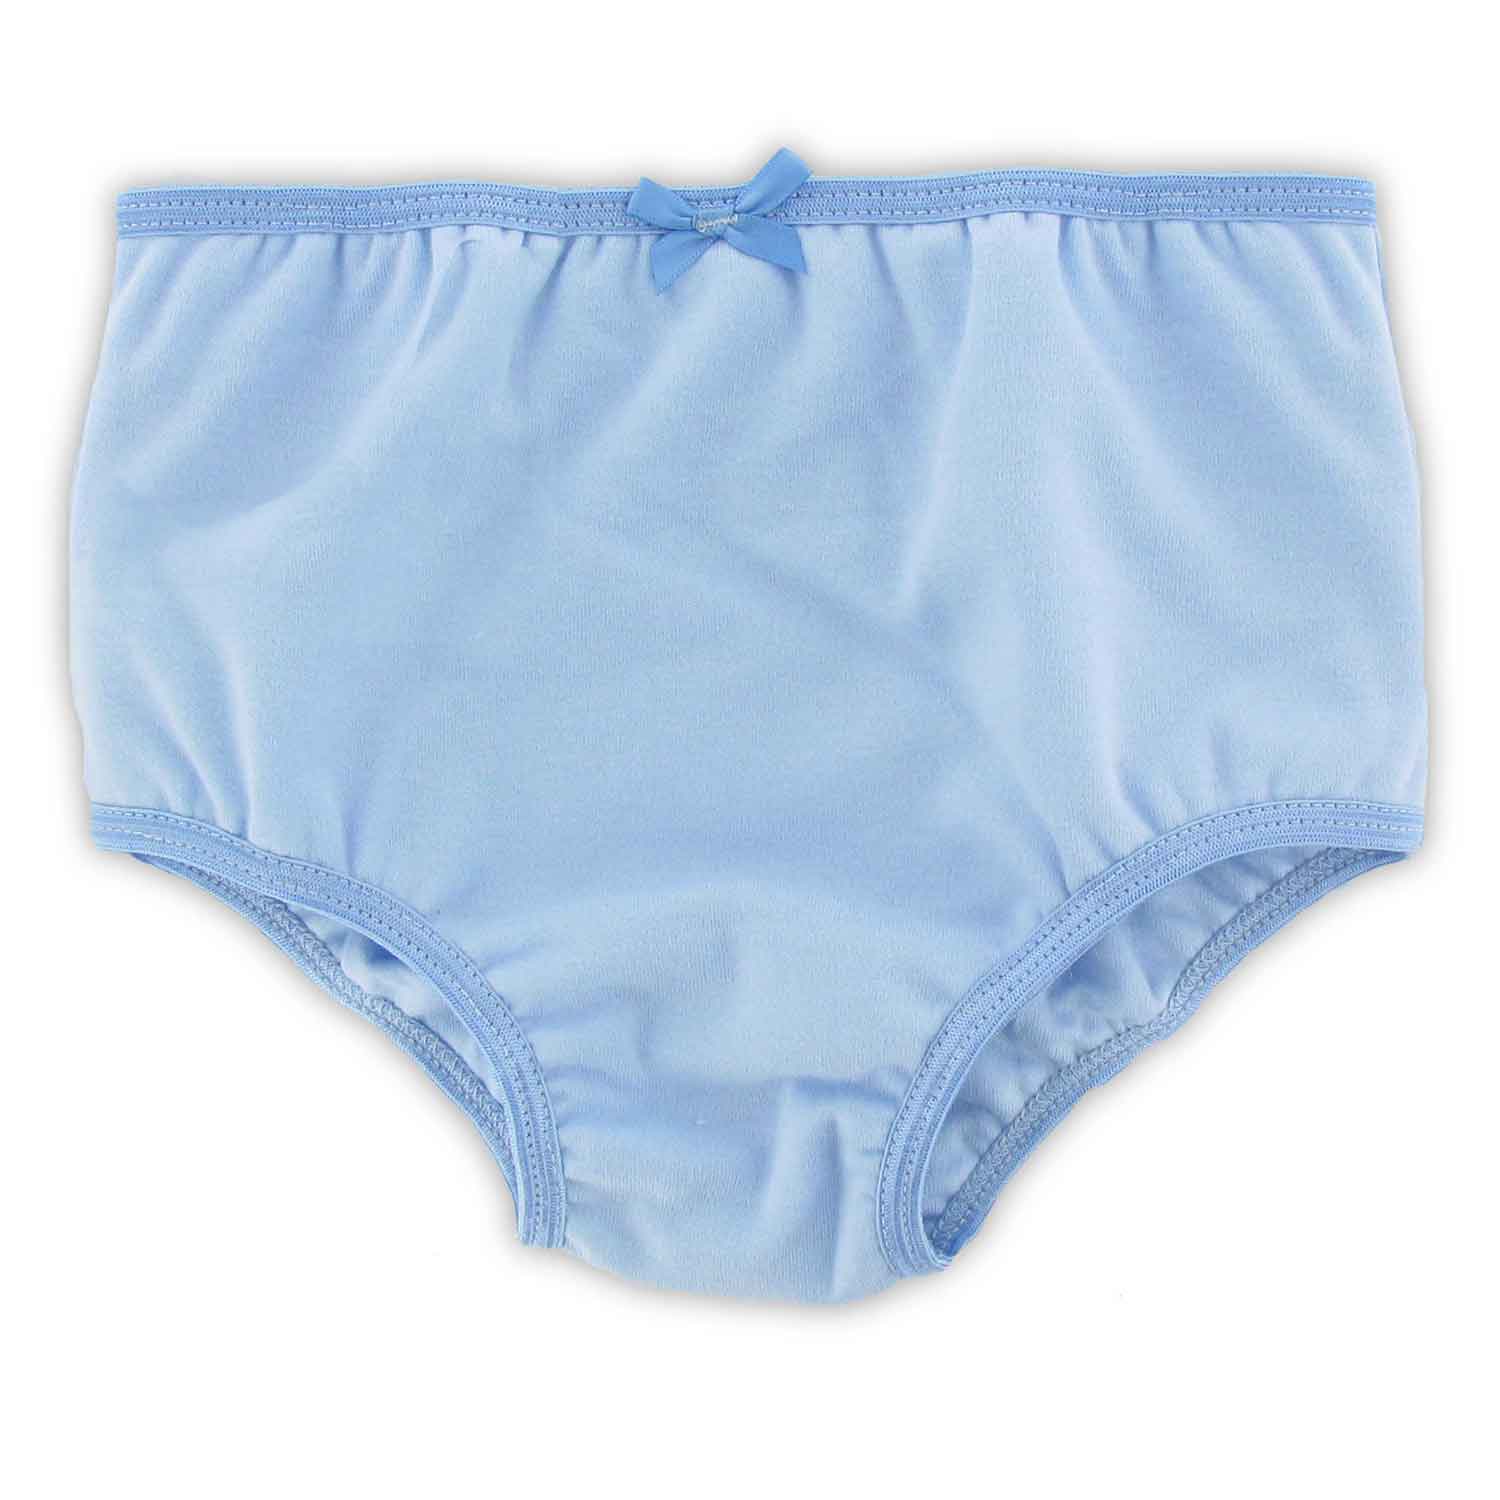 Male Protective Vinyl Pants: Bedwetting Store